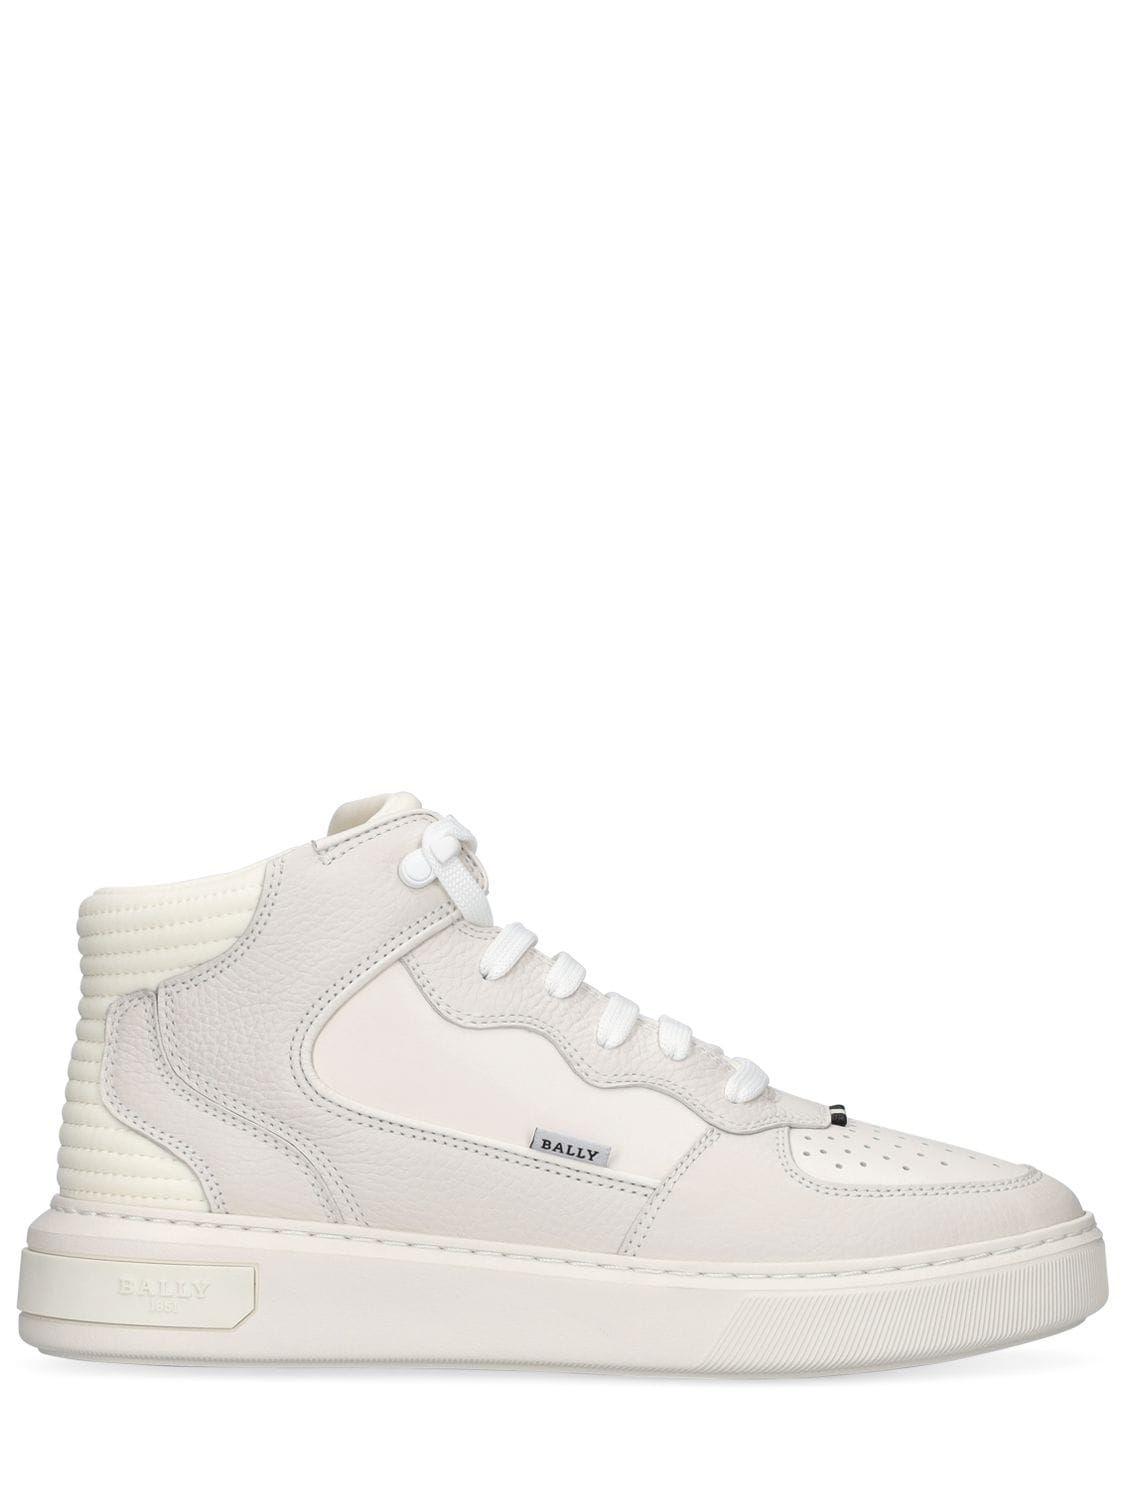 Bally 20mm Martyn Leather & Mesh Sneakers in White | Lyst